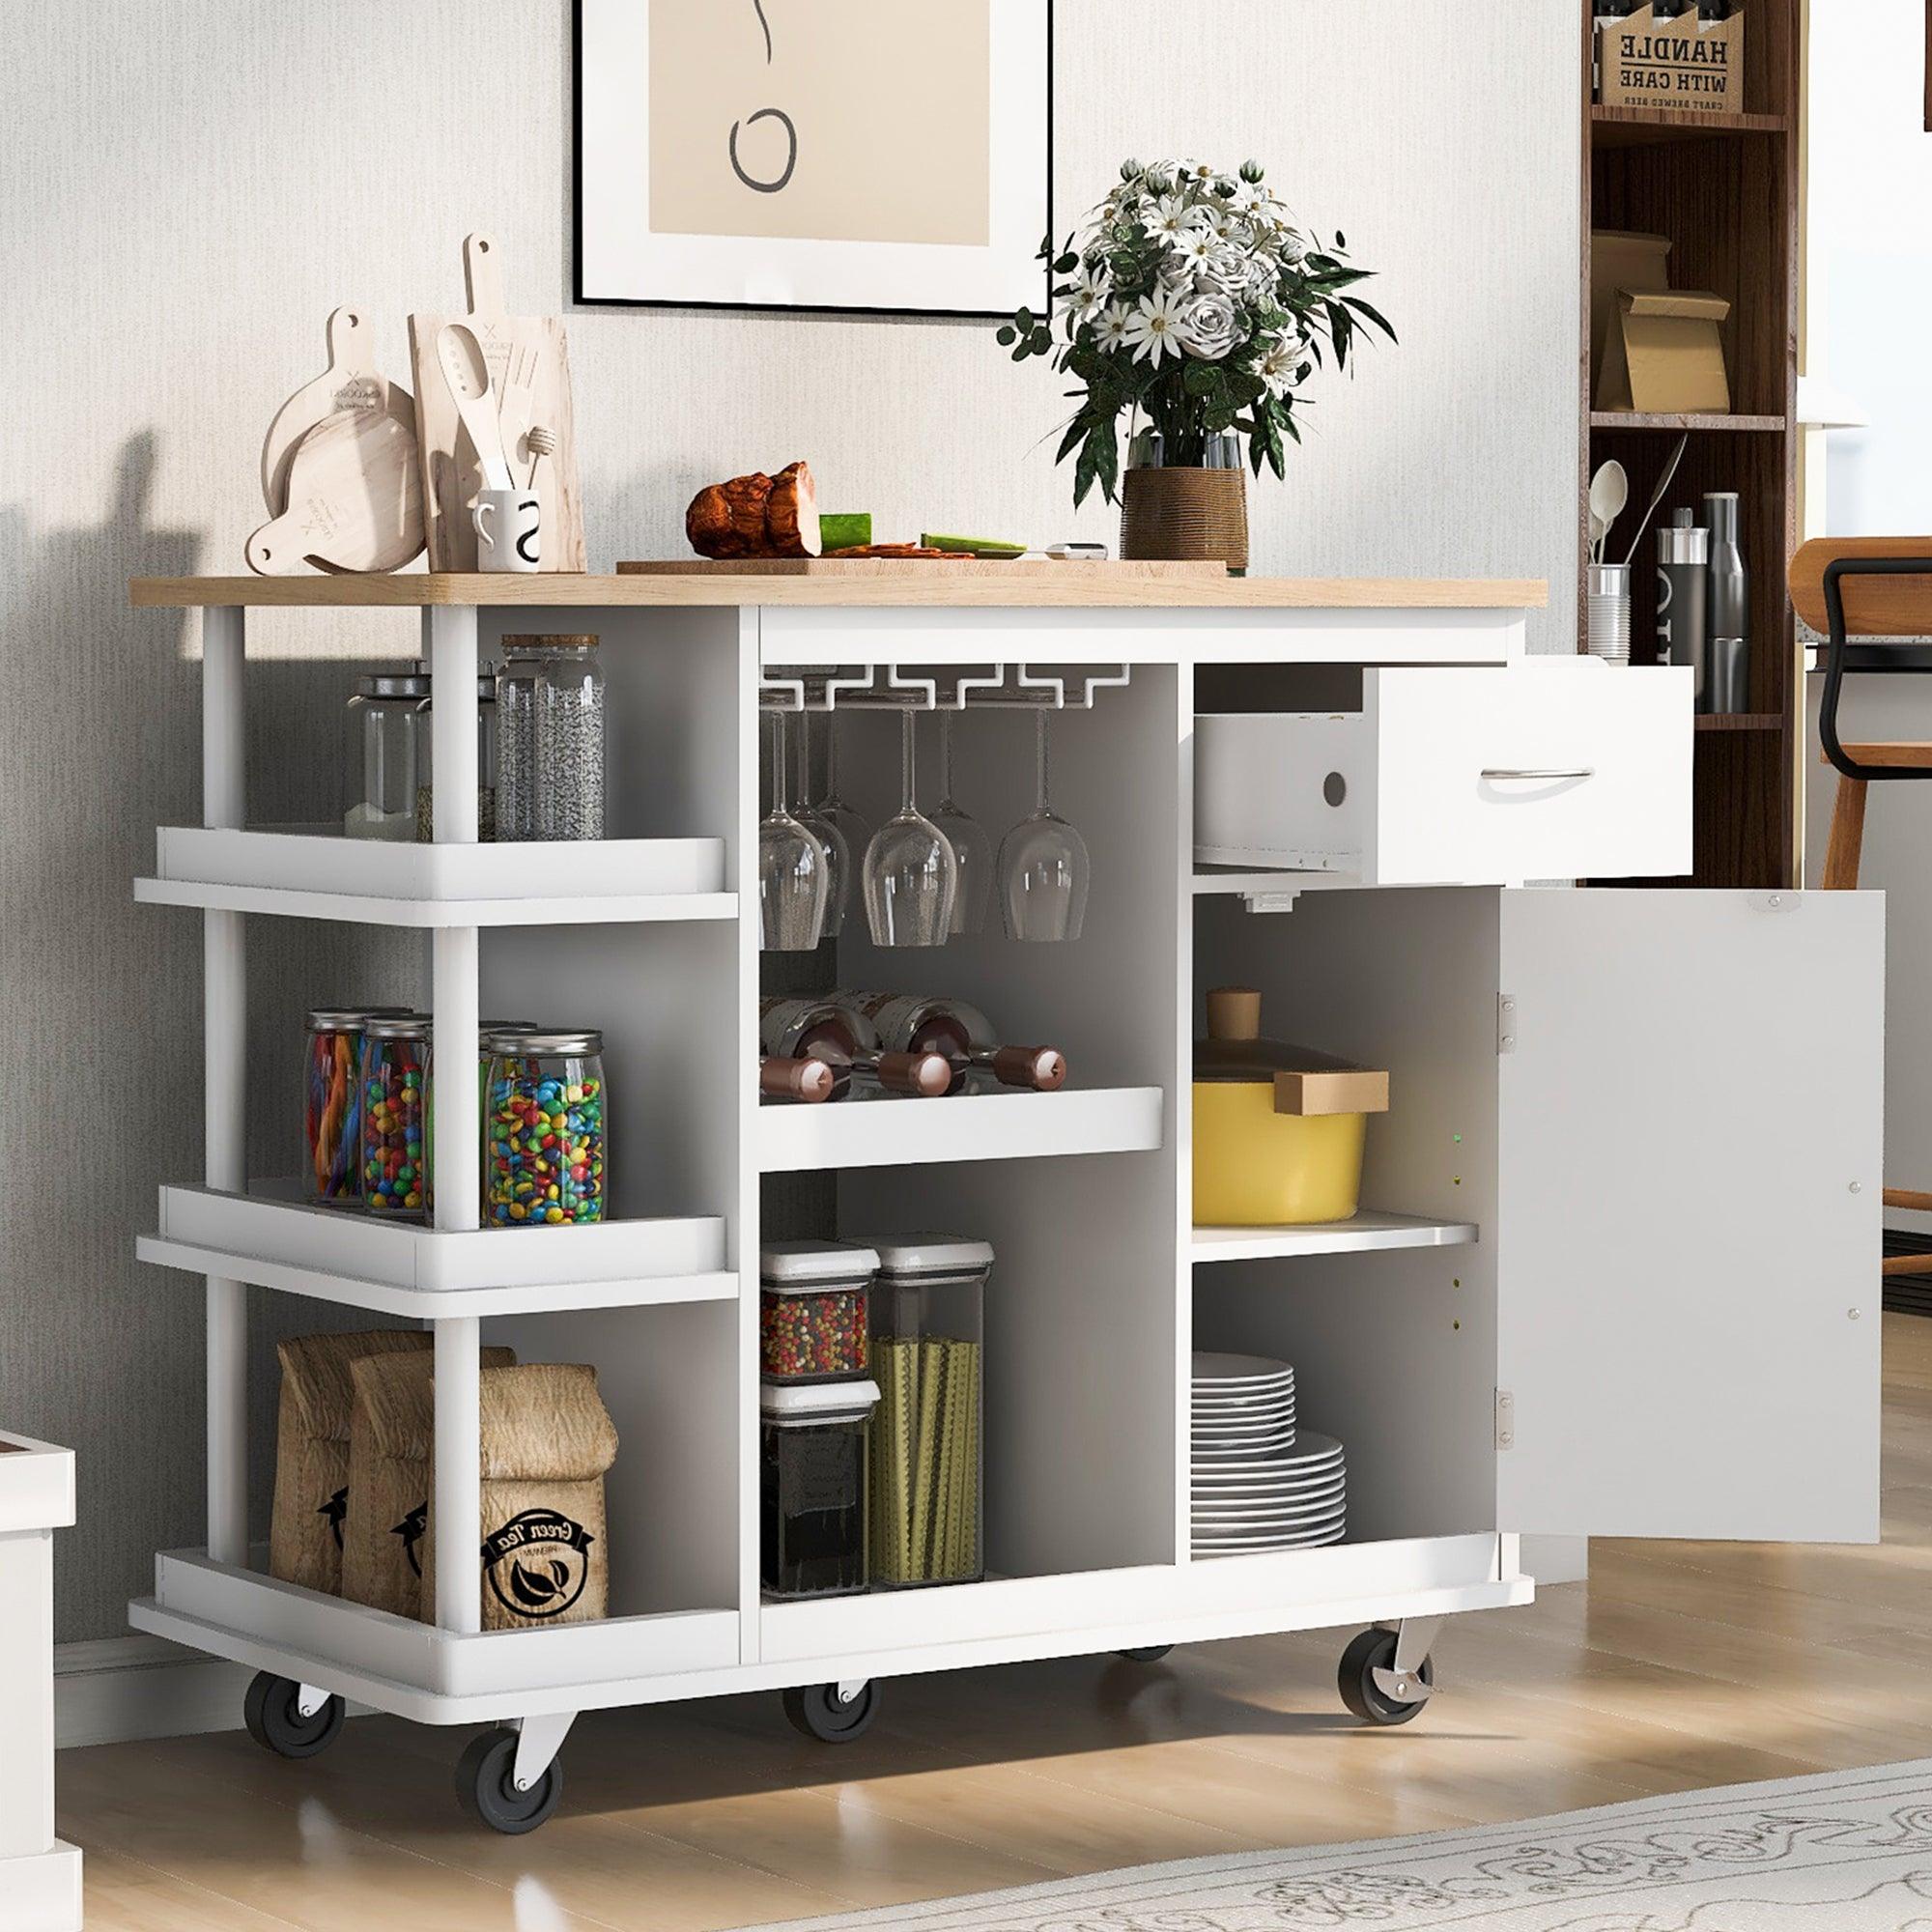 🆓🚛 Multipurpose Kitchen Cart Cabinet With Side Storage Shelves, Rubber Wood Top, Adjustable Storage Shelves, 5 Wheels, Kitchen Storage Island With Wine Rack for Dining Room, Home, Bar, White